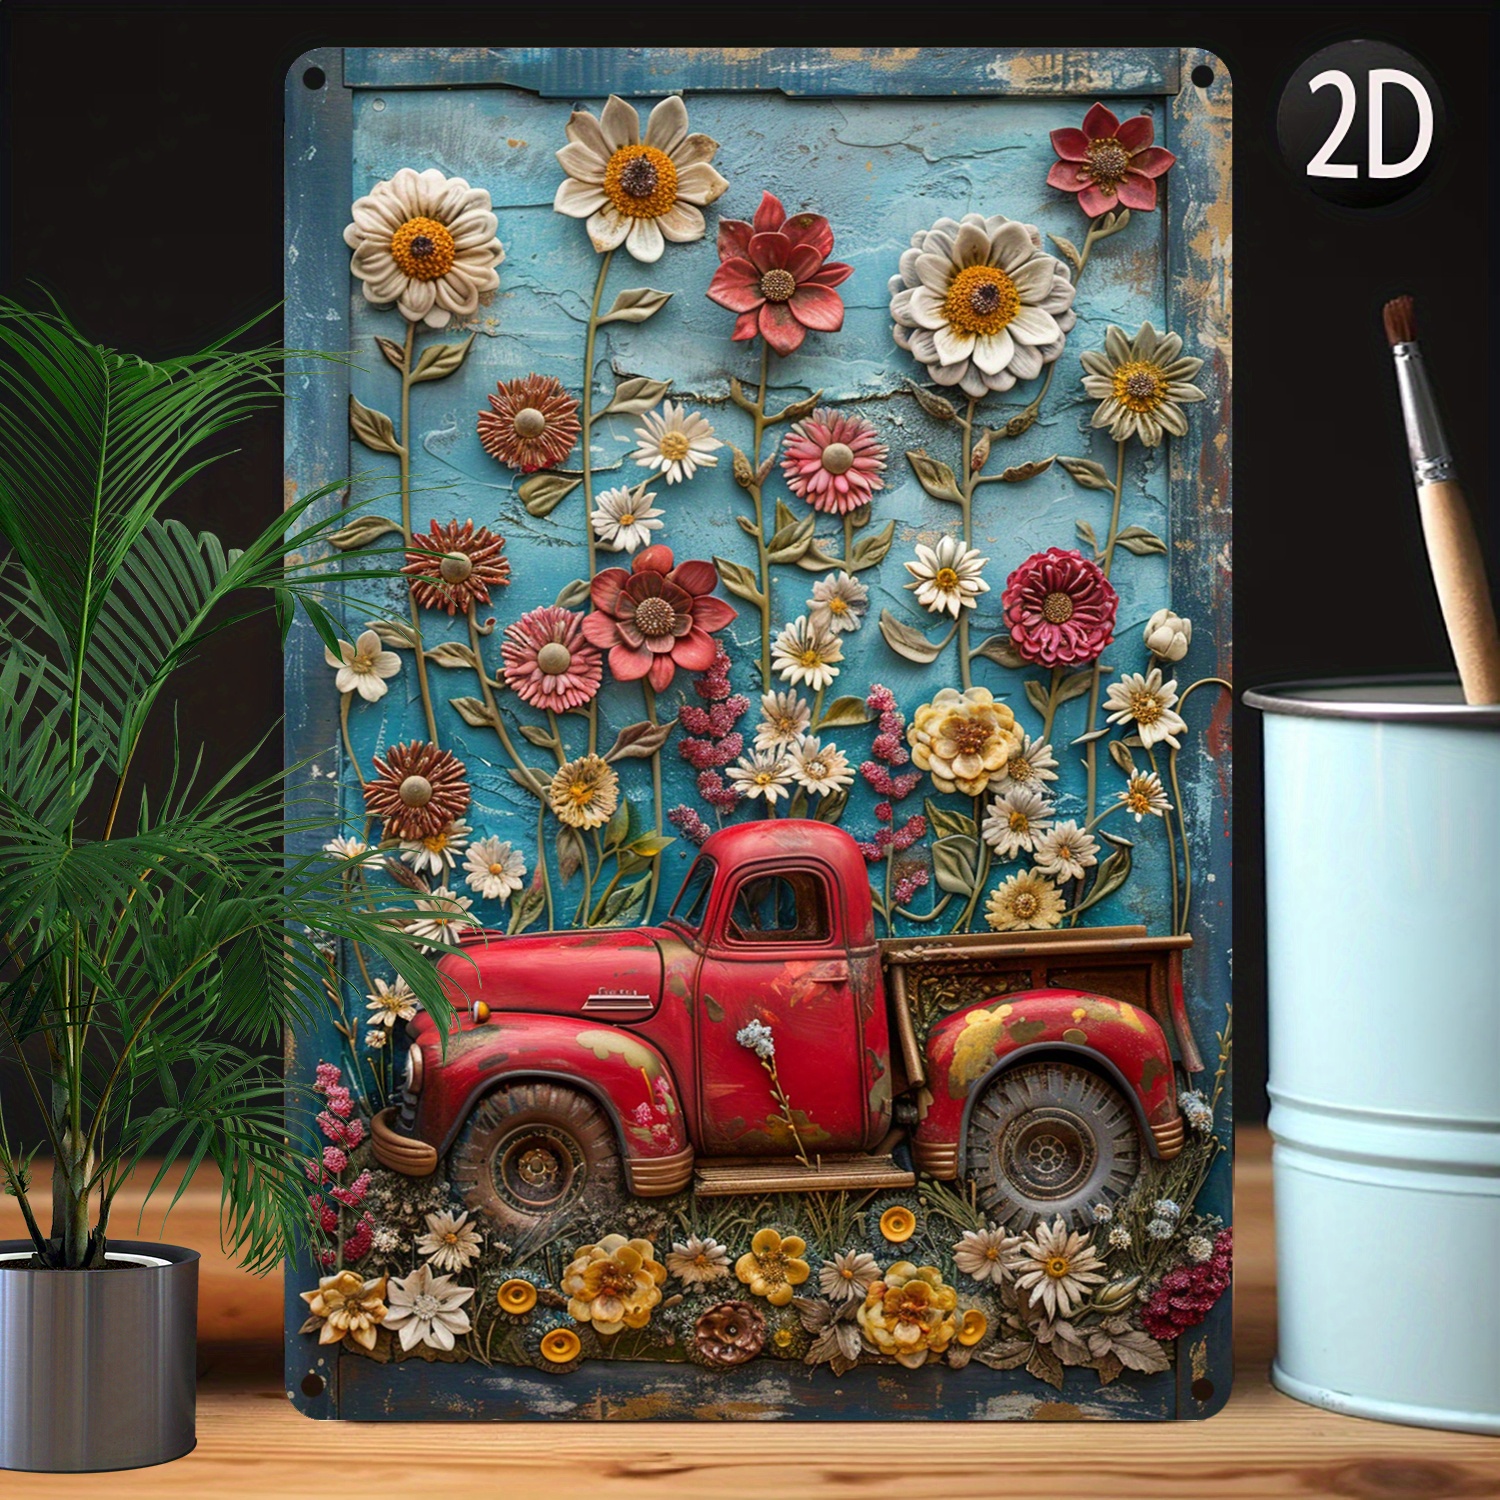 

Aluminum Wall Art, 1pc 8x12 Inch Red Truck And Flowers 3d Embossed Tin Sign, Durable Metal Flower Decor For Home And Office, Moisture Resistant Vintage Autumn Winter Decoration, Unique Gift Idea